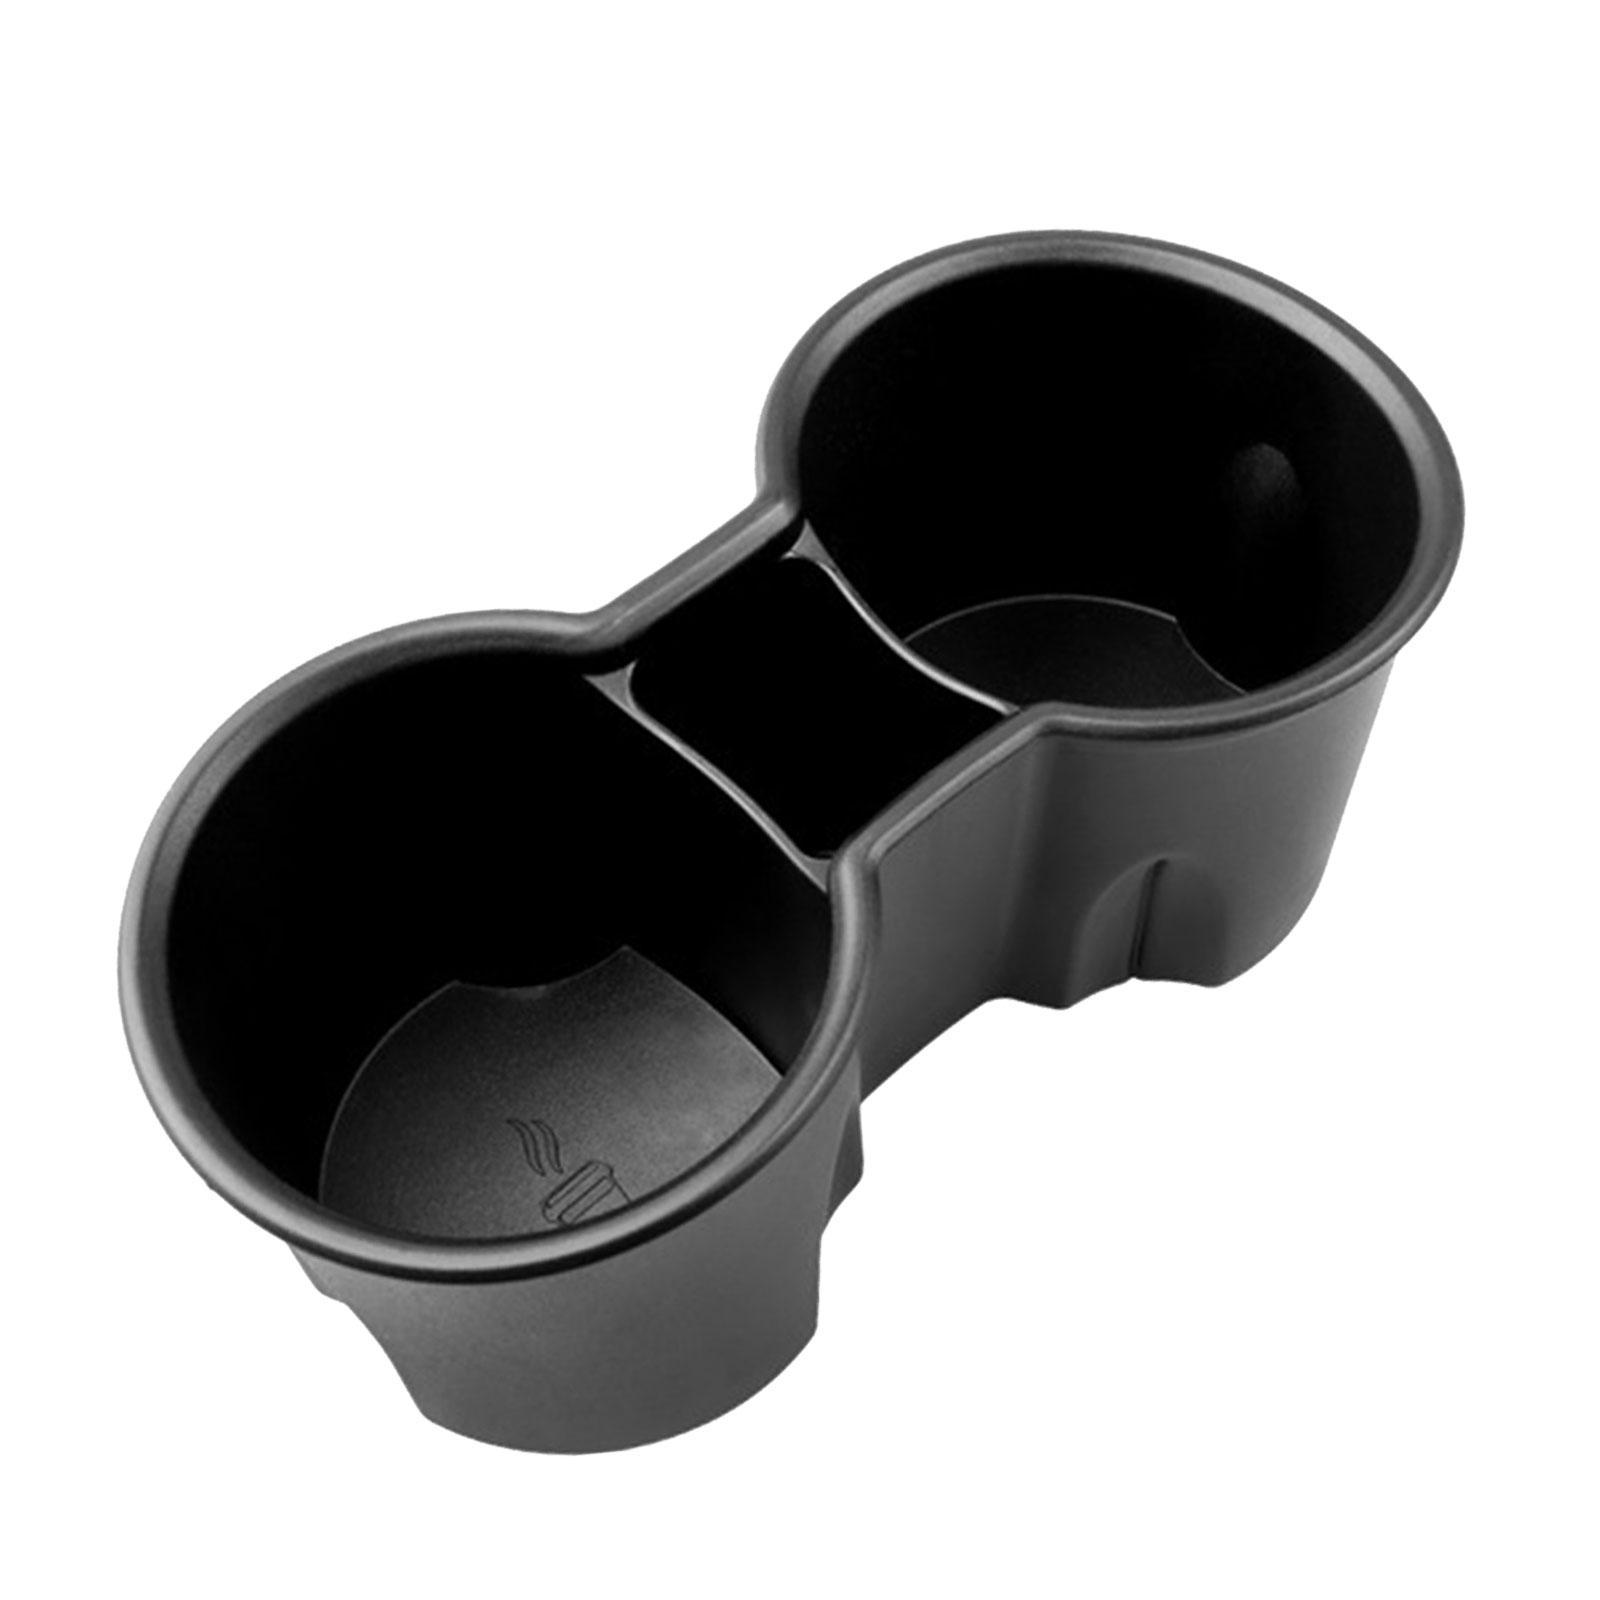 Console Water Cup Holder Insert Organizer for